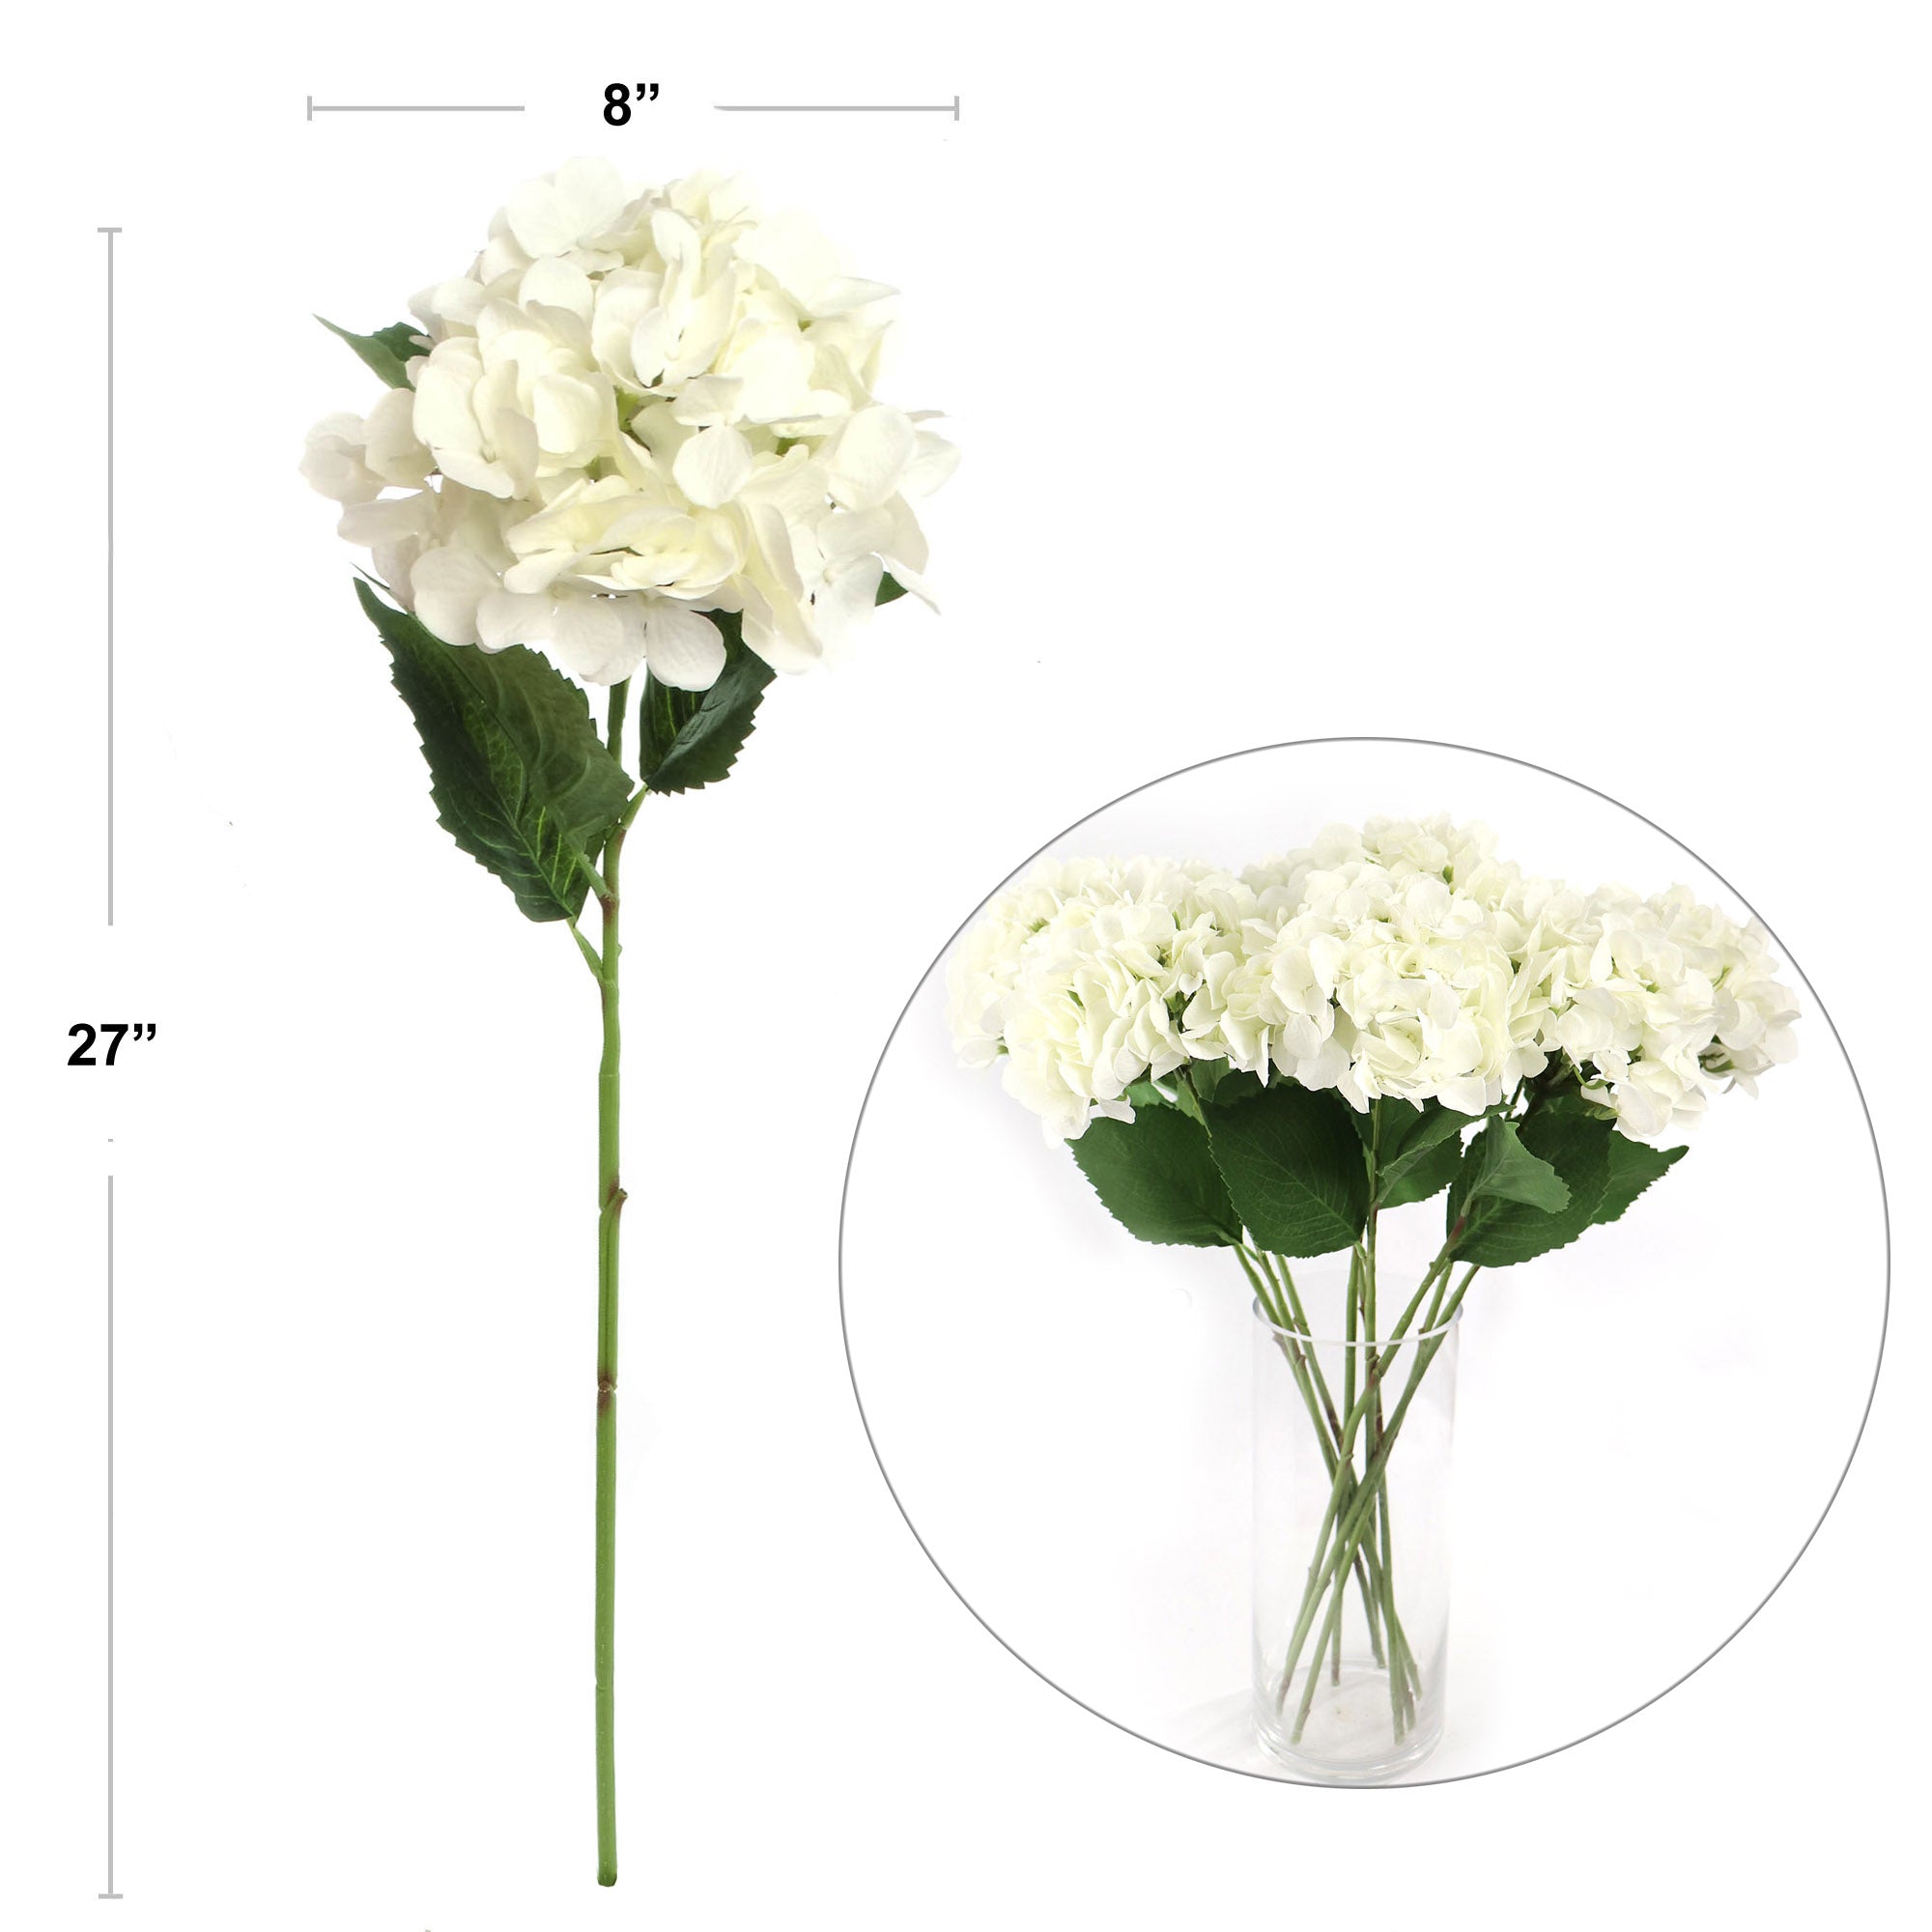 Cream Hydrangea 33" - Elegant Floral Accent for Home Décor and Special Occasions